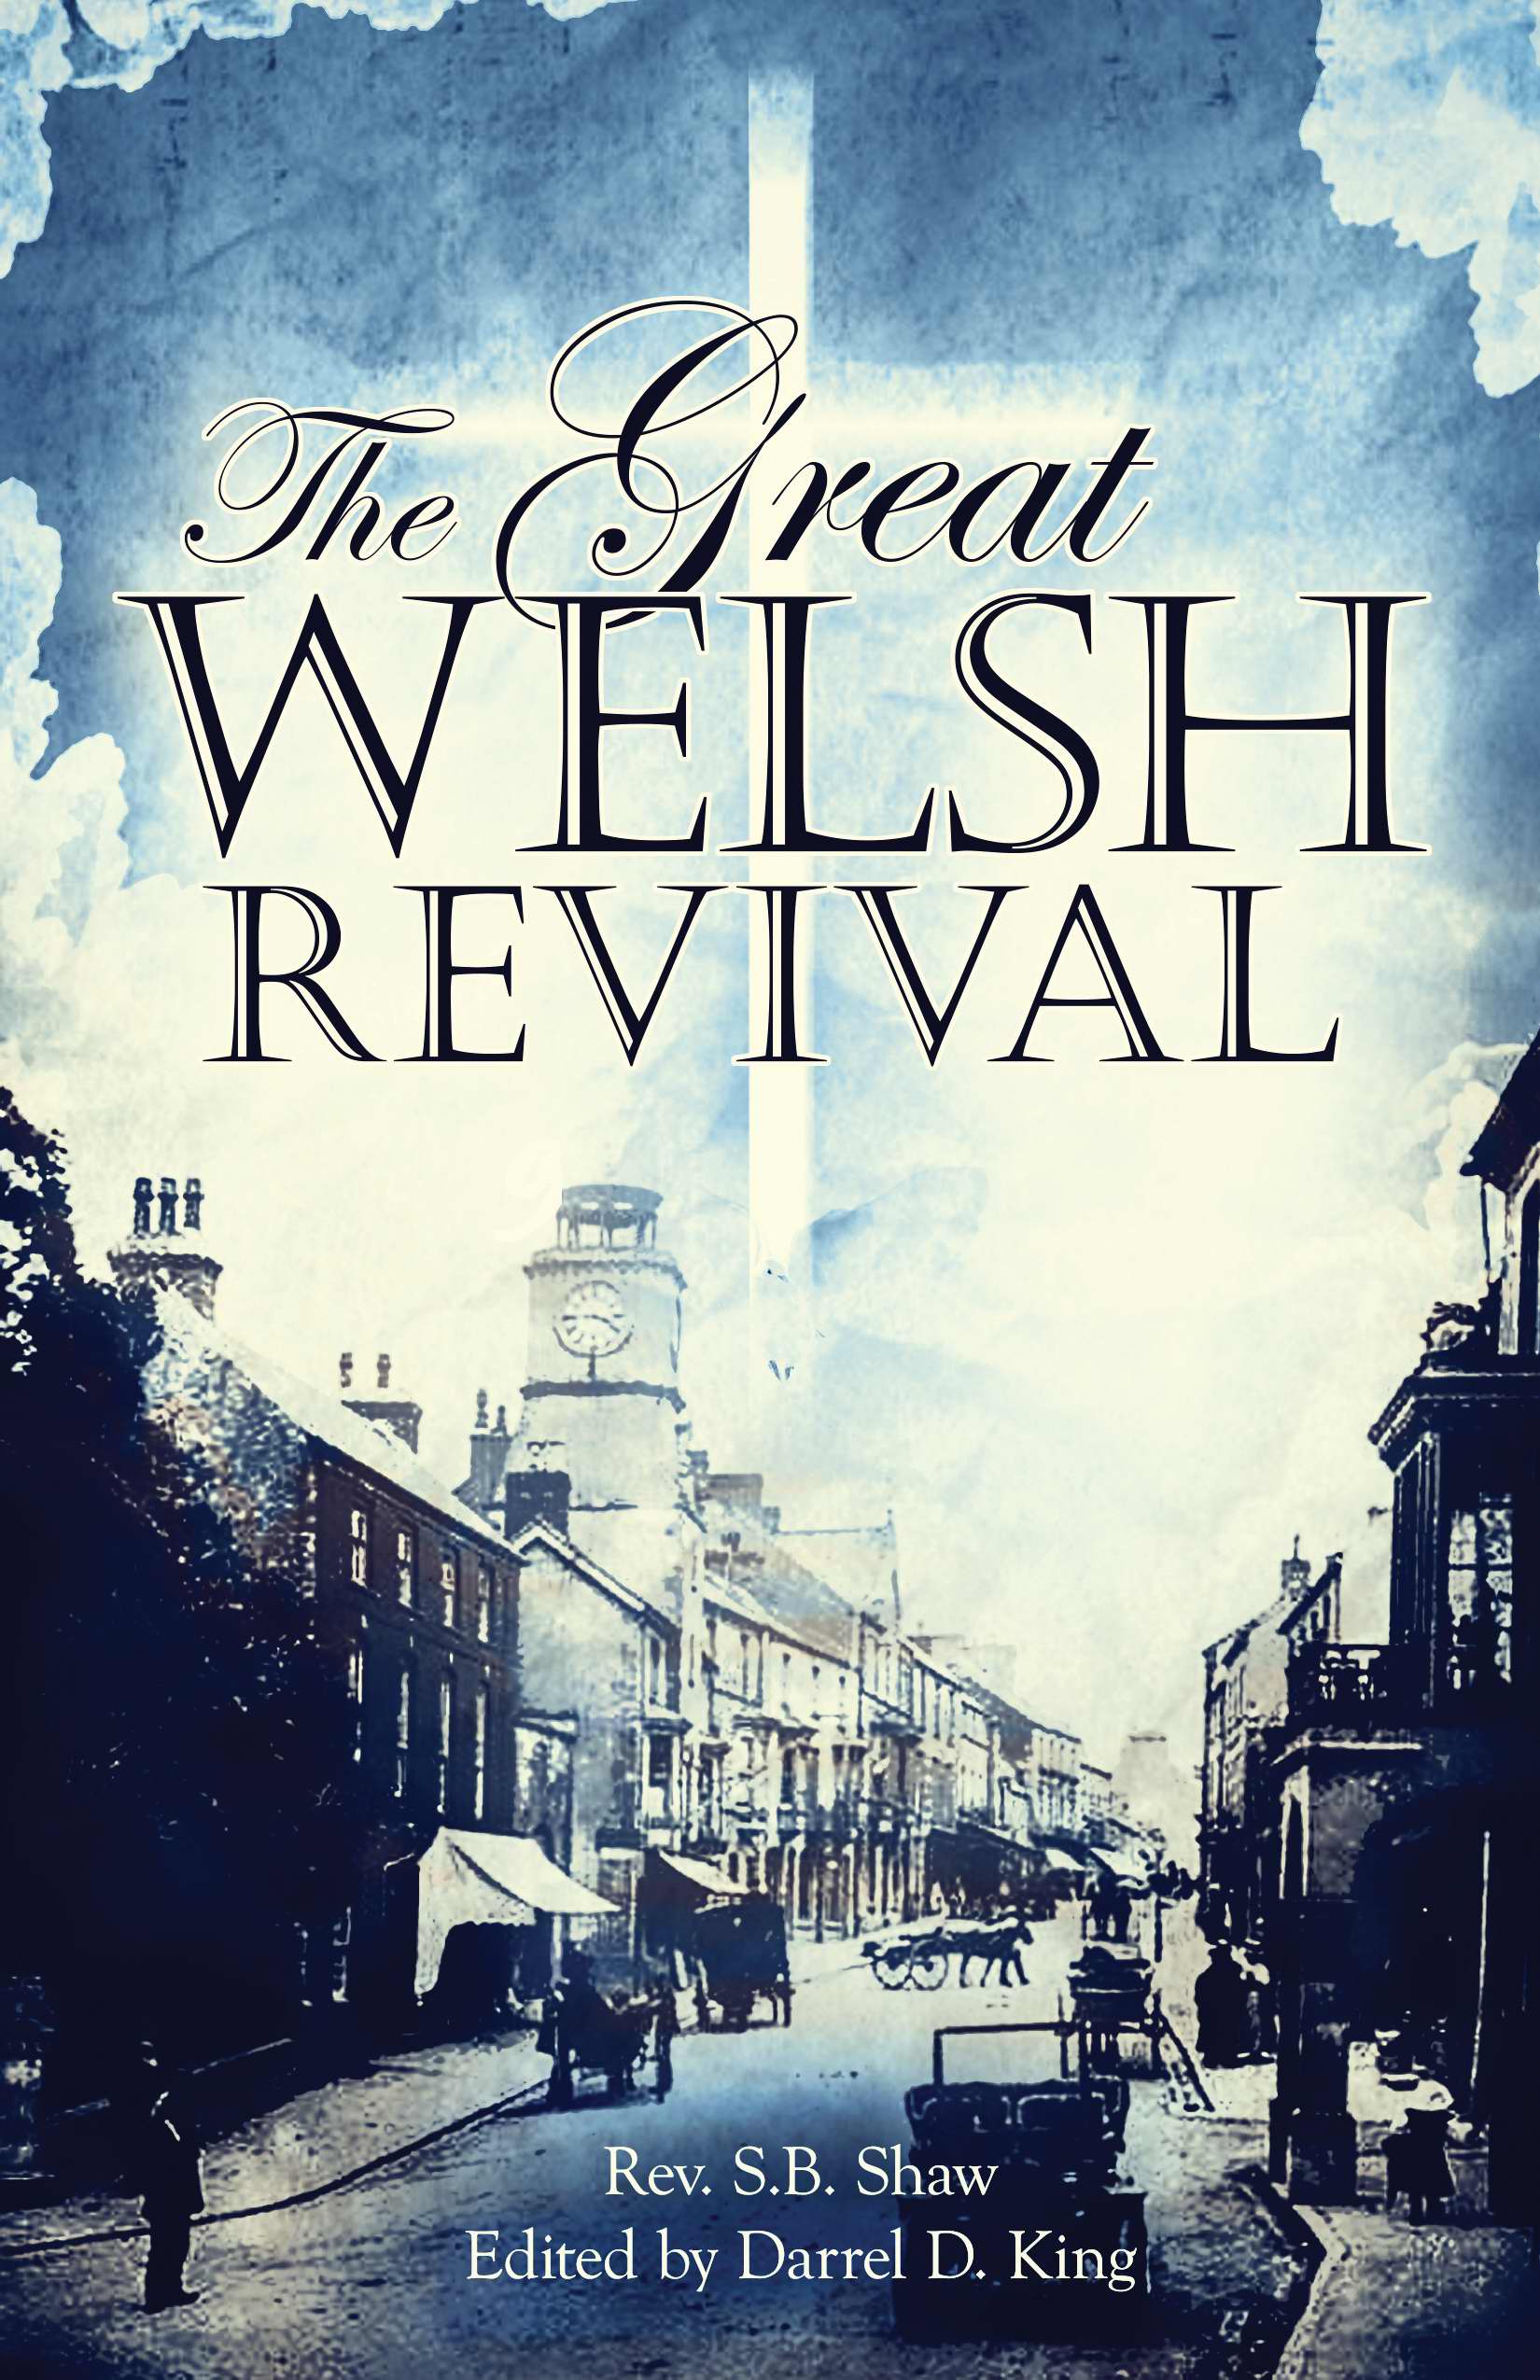 Image of The Great Welsh Revival other